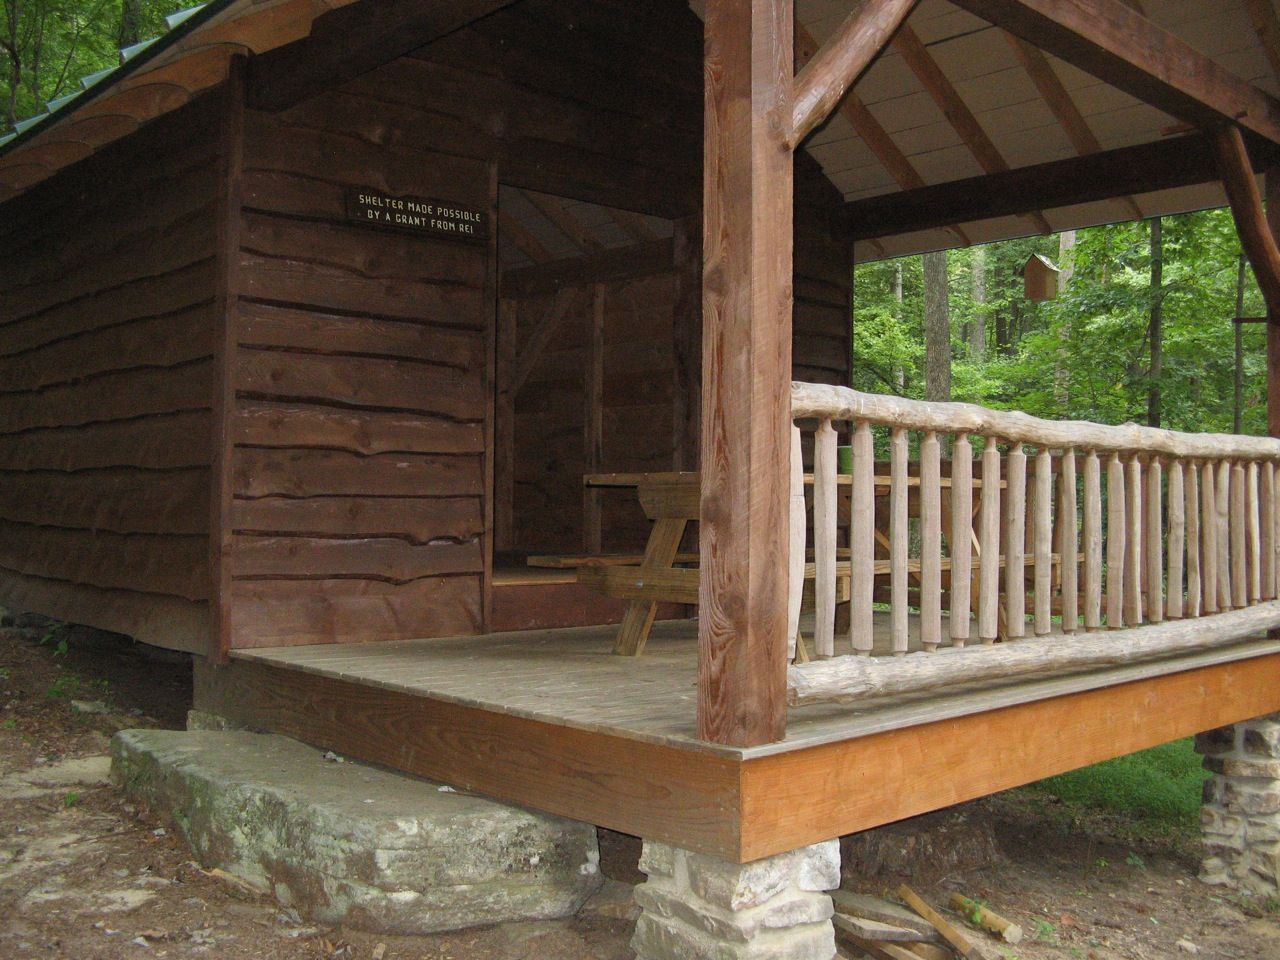 A wooden PATC shelter, with a porch and picnic table.